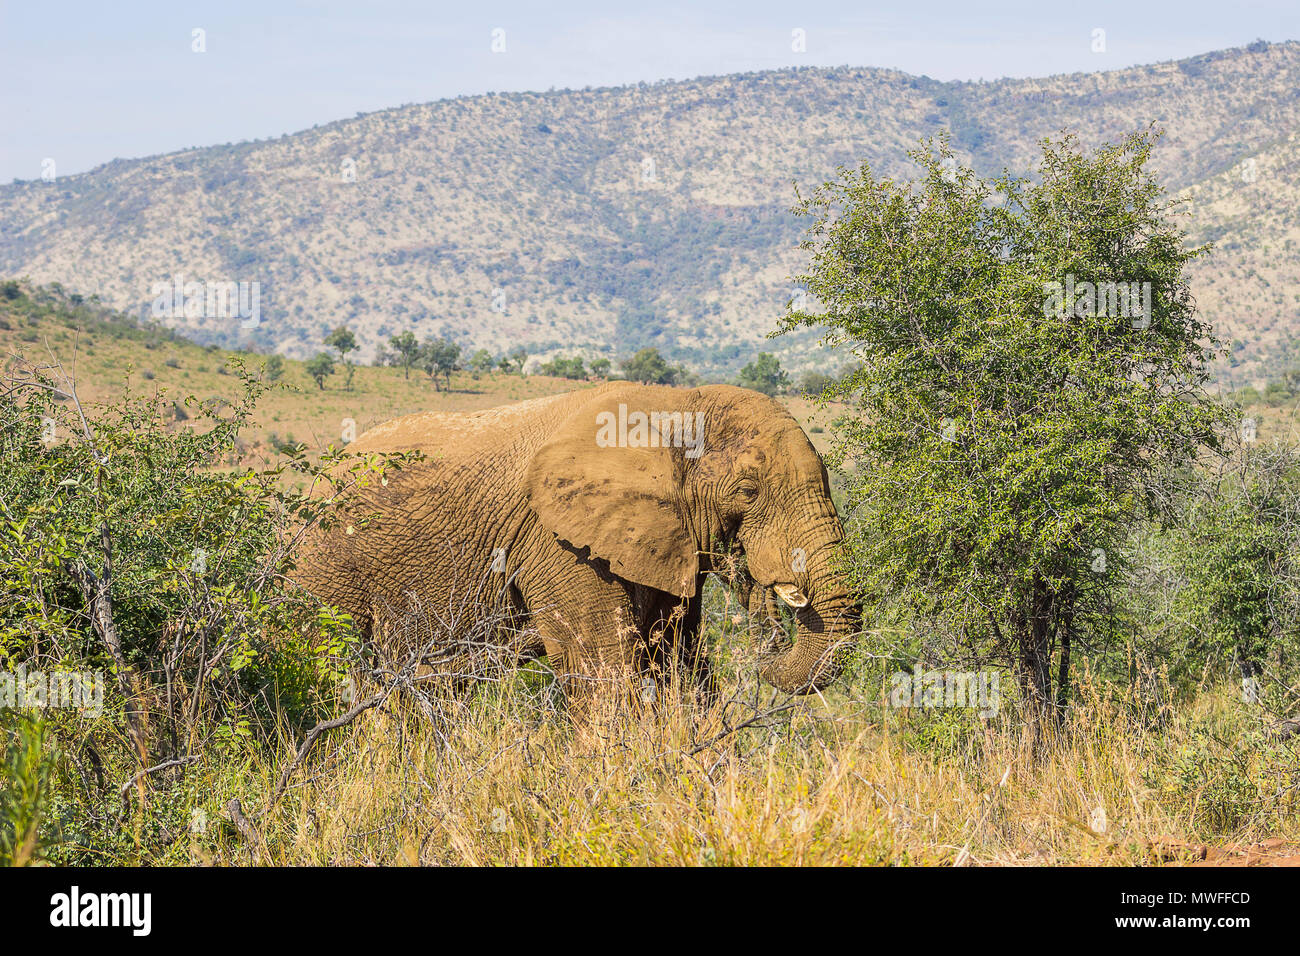 Elephant standing in the grass eating from a small tree Stock Photo